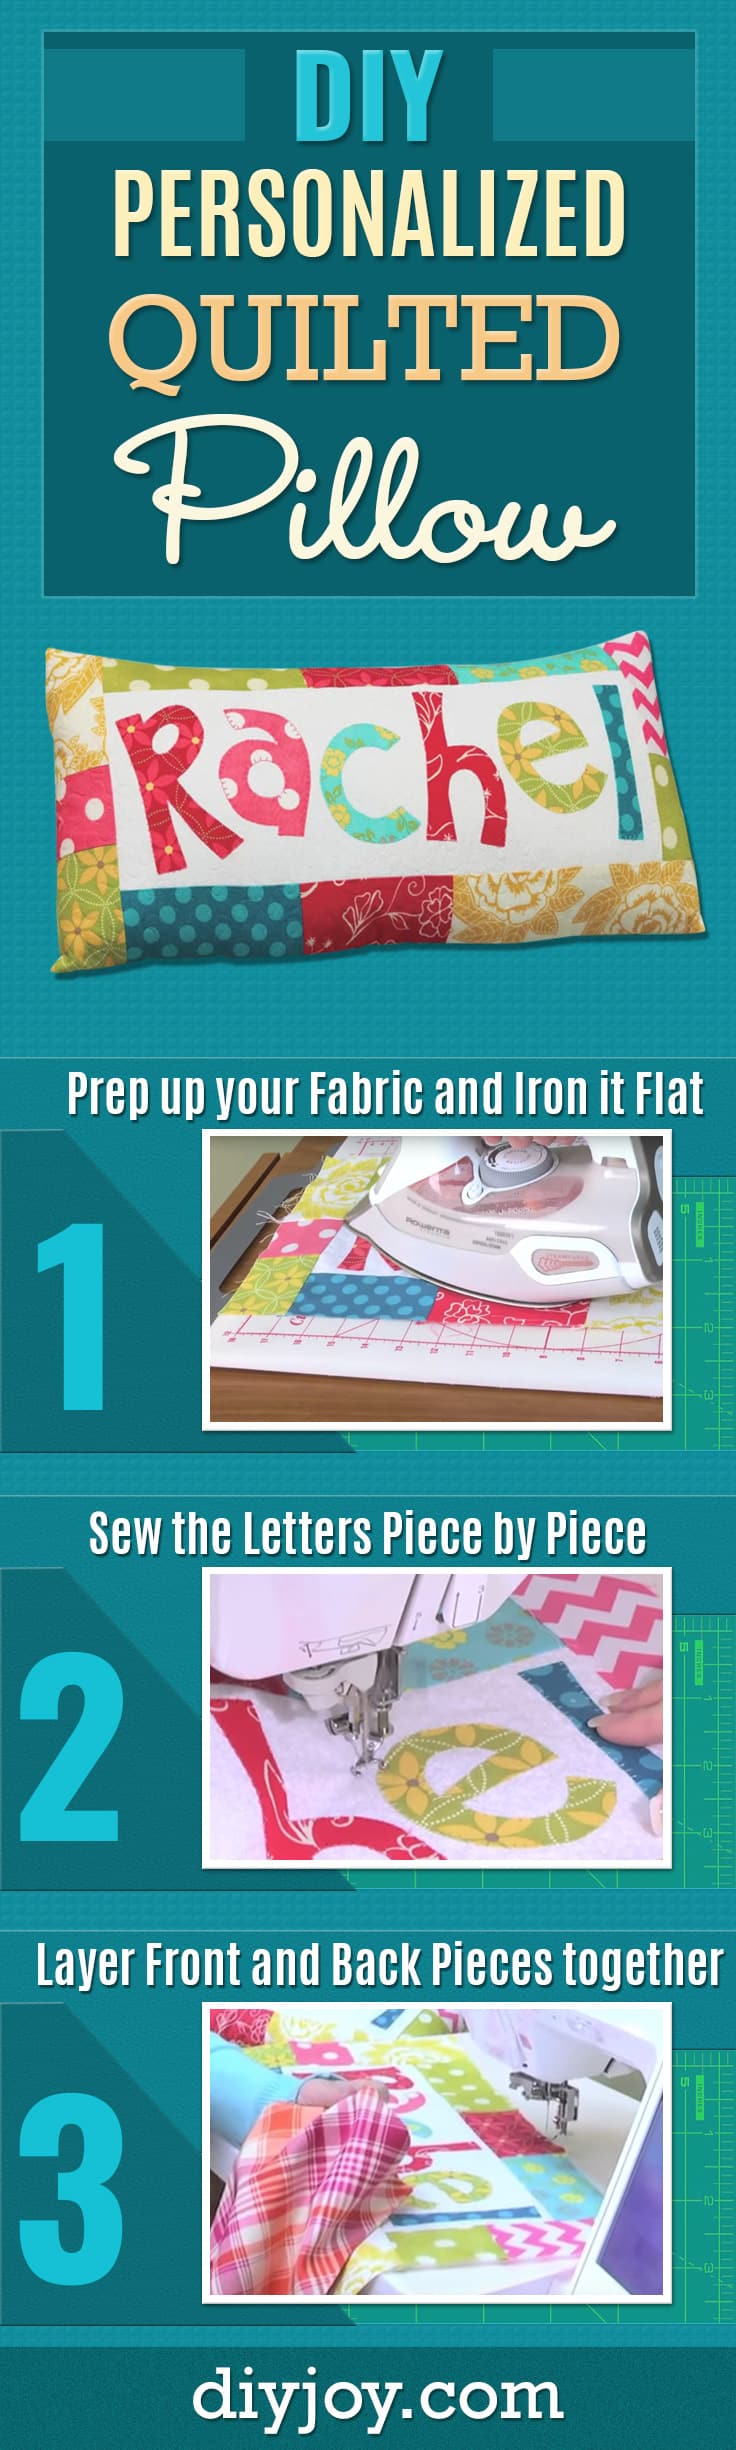 DIY Sewing Ideas - Free Sewing Tutorials for Cheap DIY Christmas Gifts - Personalized Name Quilted Pillow 